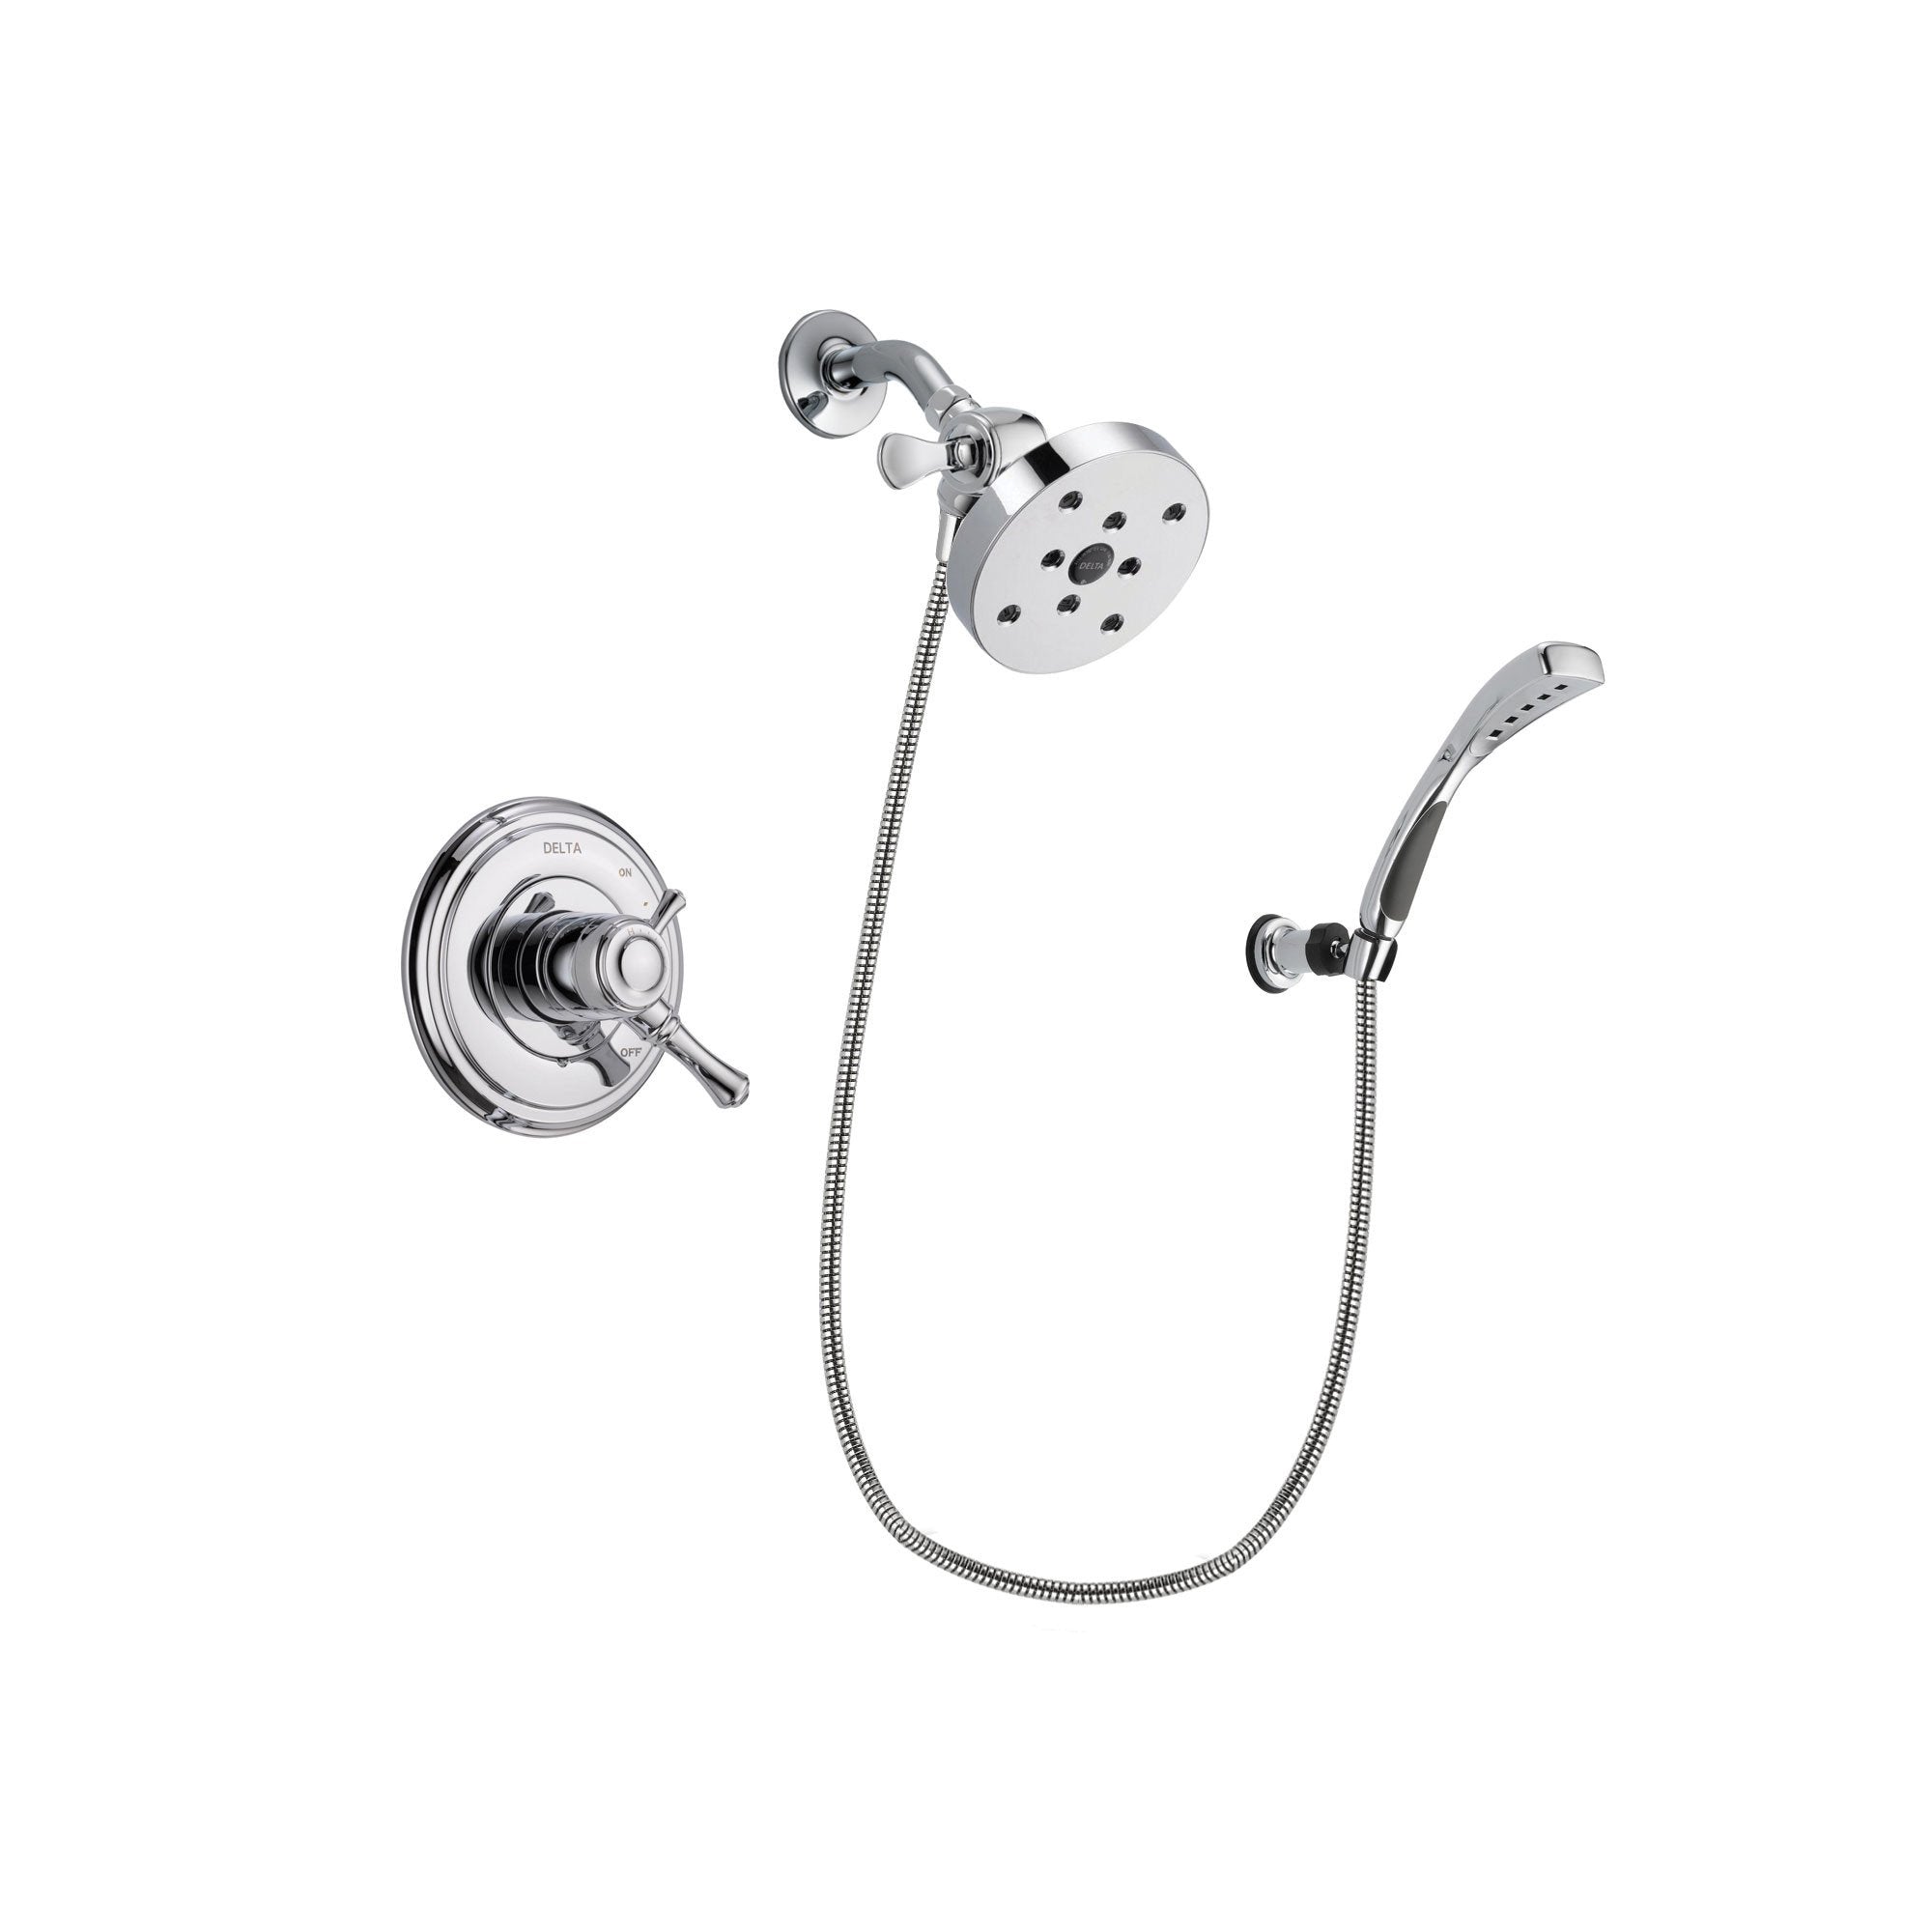 Delta Cassidy Chrome Finish Dual Control Shower Faucet System Package with 5-1/2 inch Shower Head and Wall-Mount Bracket with Handheld Shower Spray Includes Rough-in Valve DSP1104V